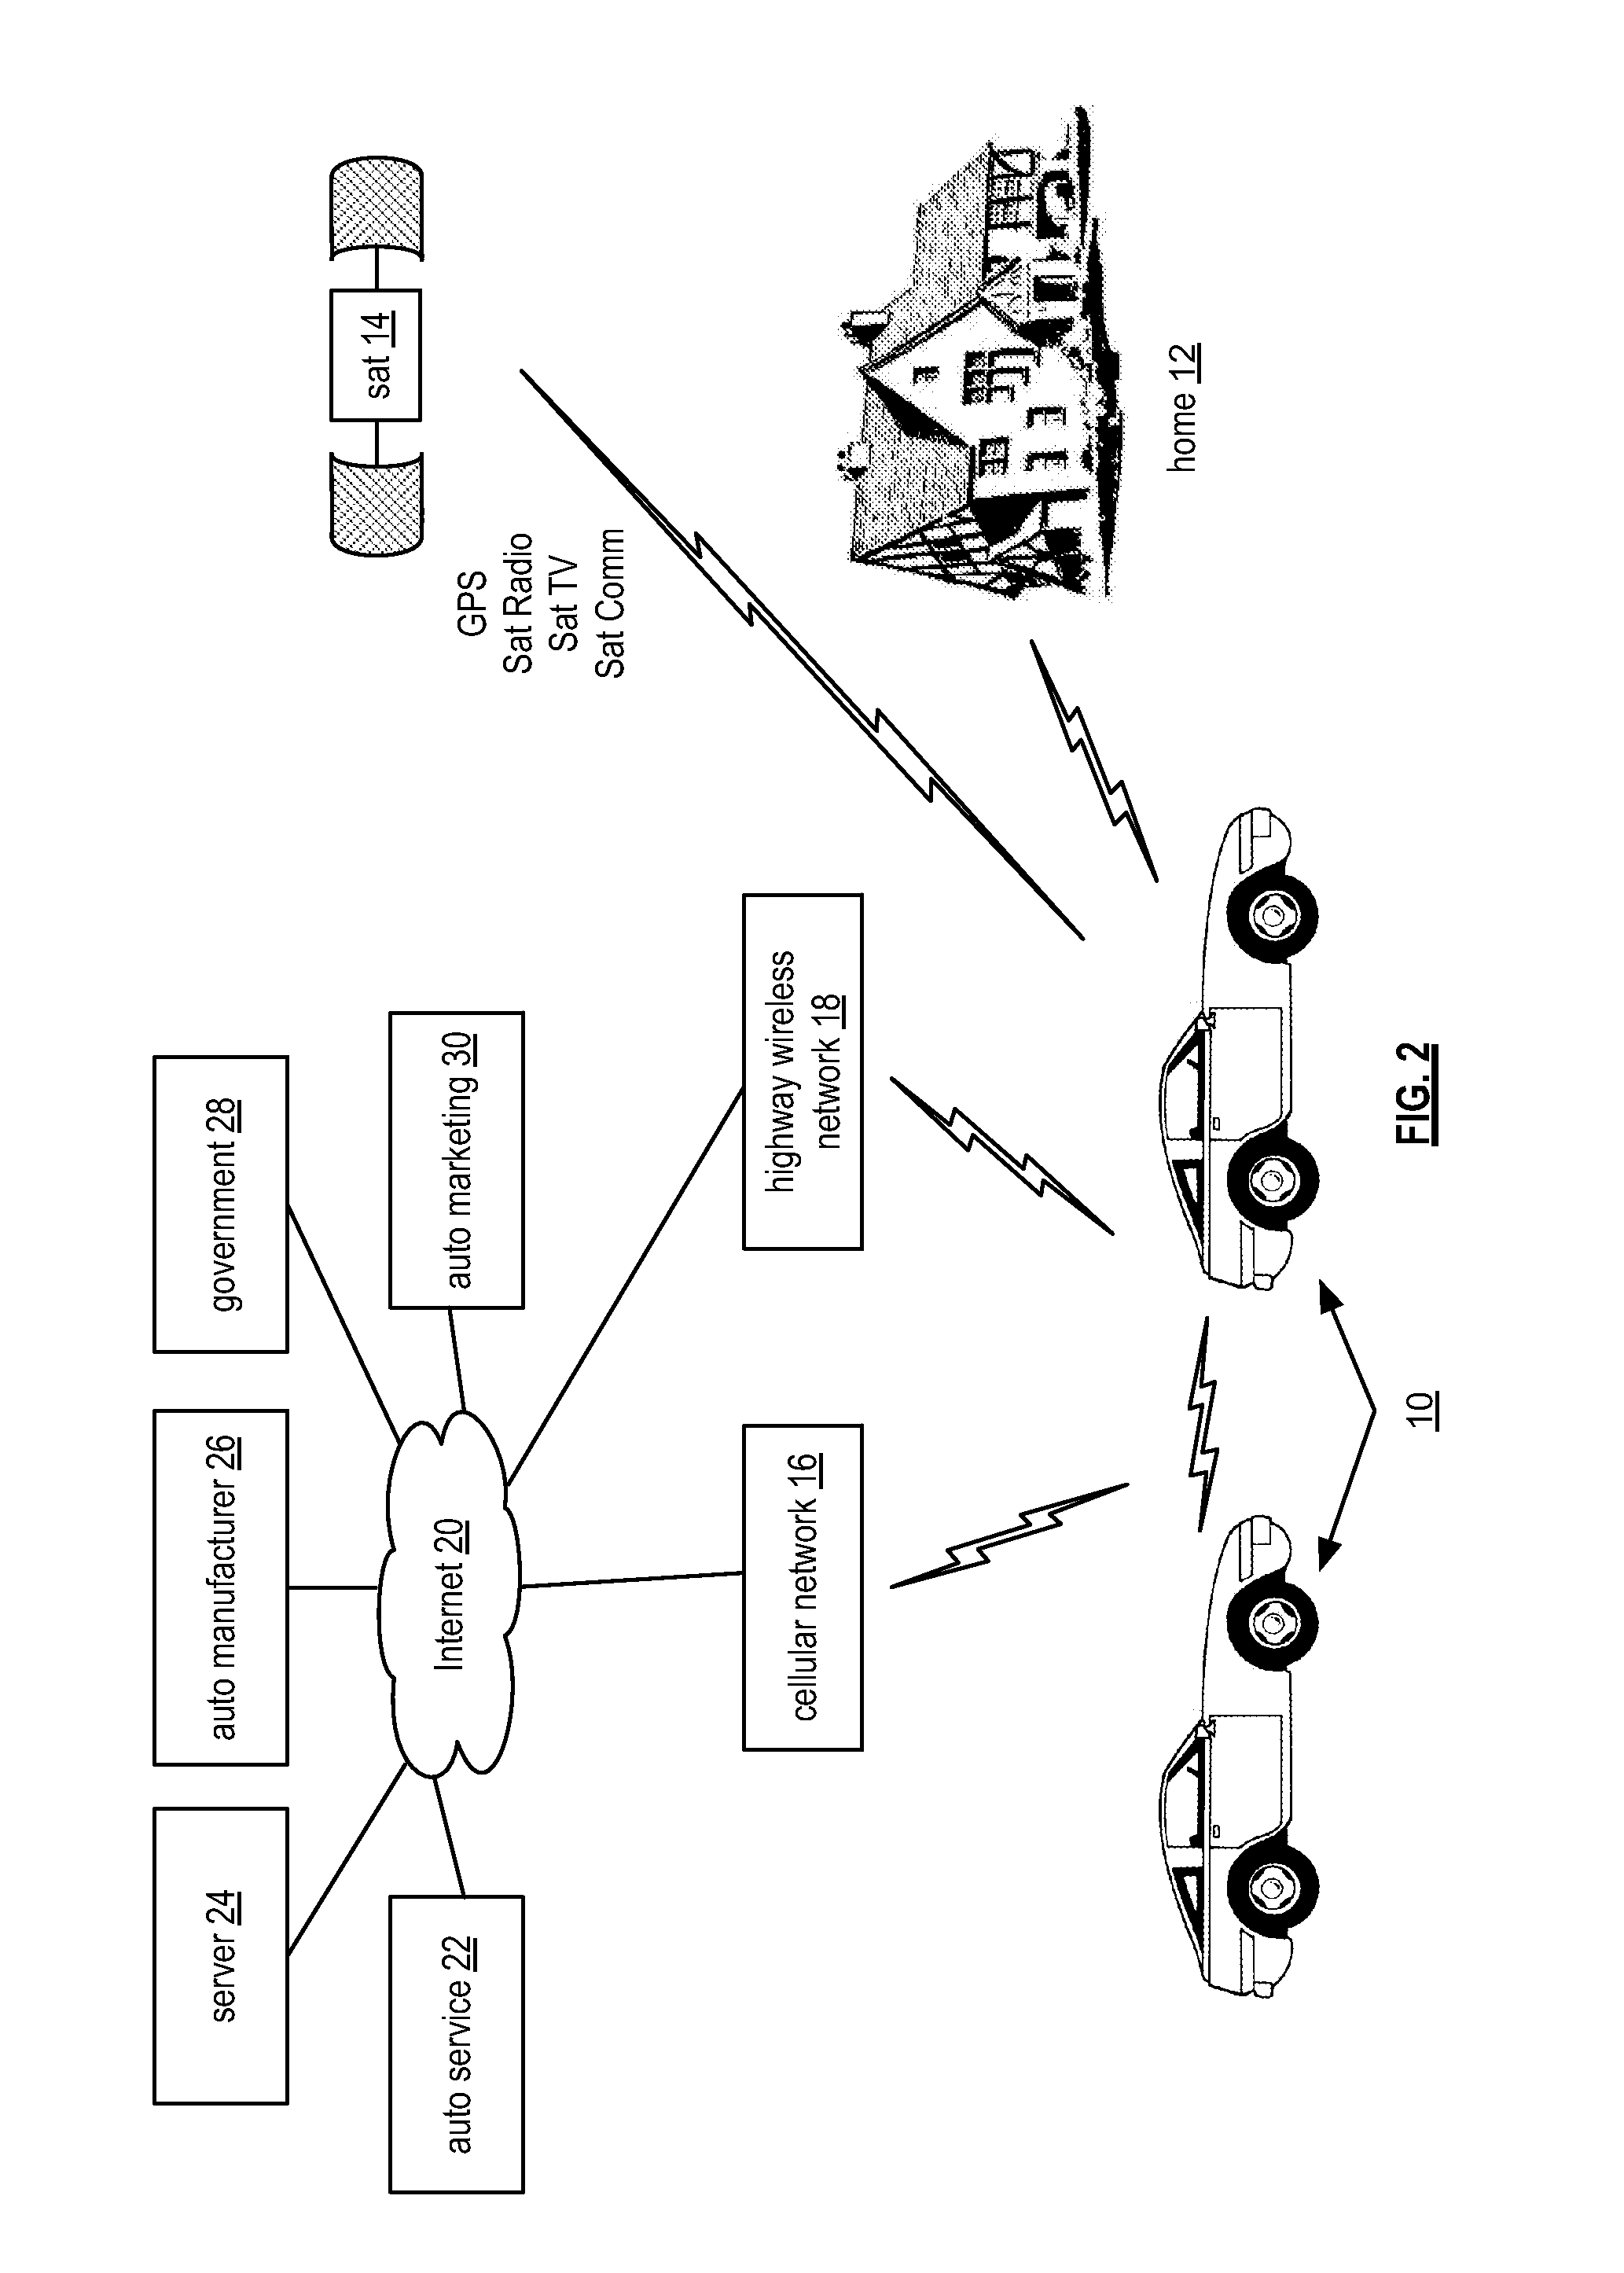 Multi-Level Video Processing Within A Vehicular Communication Network